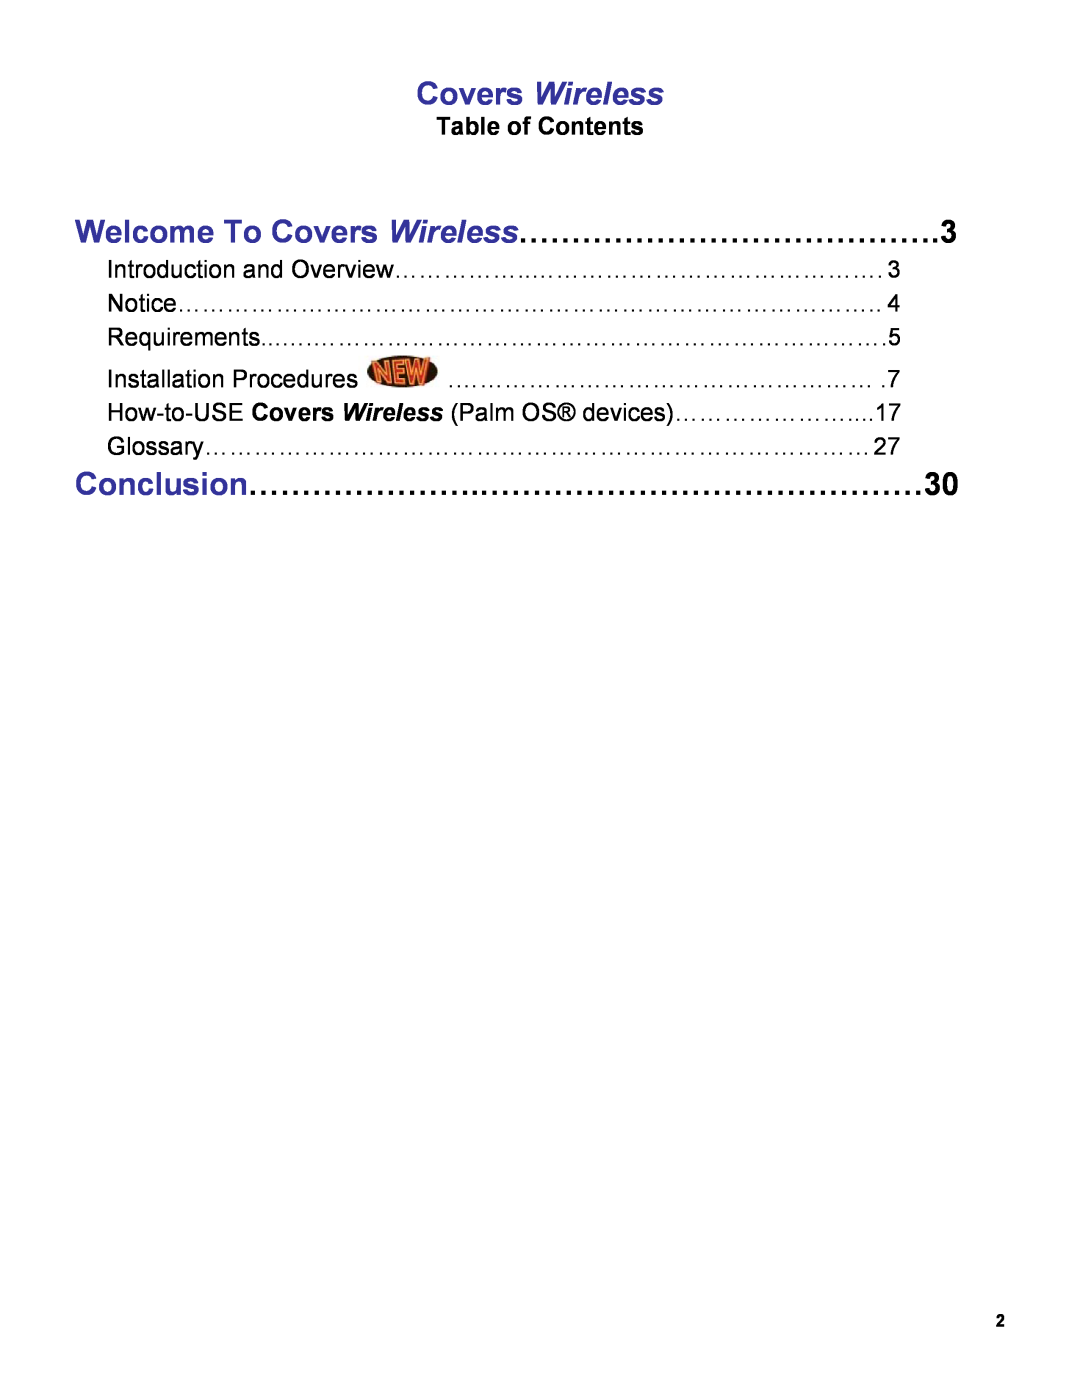 Palm OS Devices manual Welcome To Covers Wireless………………………………….3, Conclusion………………….……………………………………30, Table of Contents 